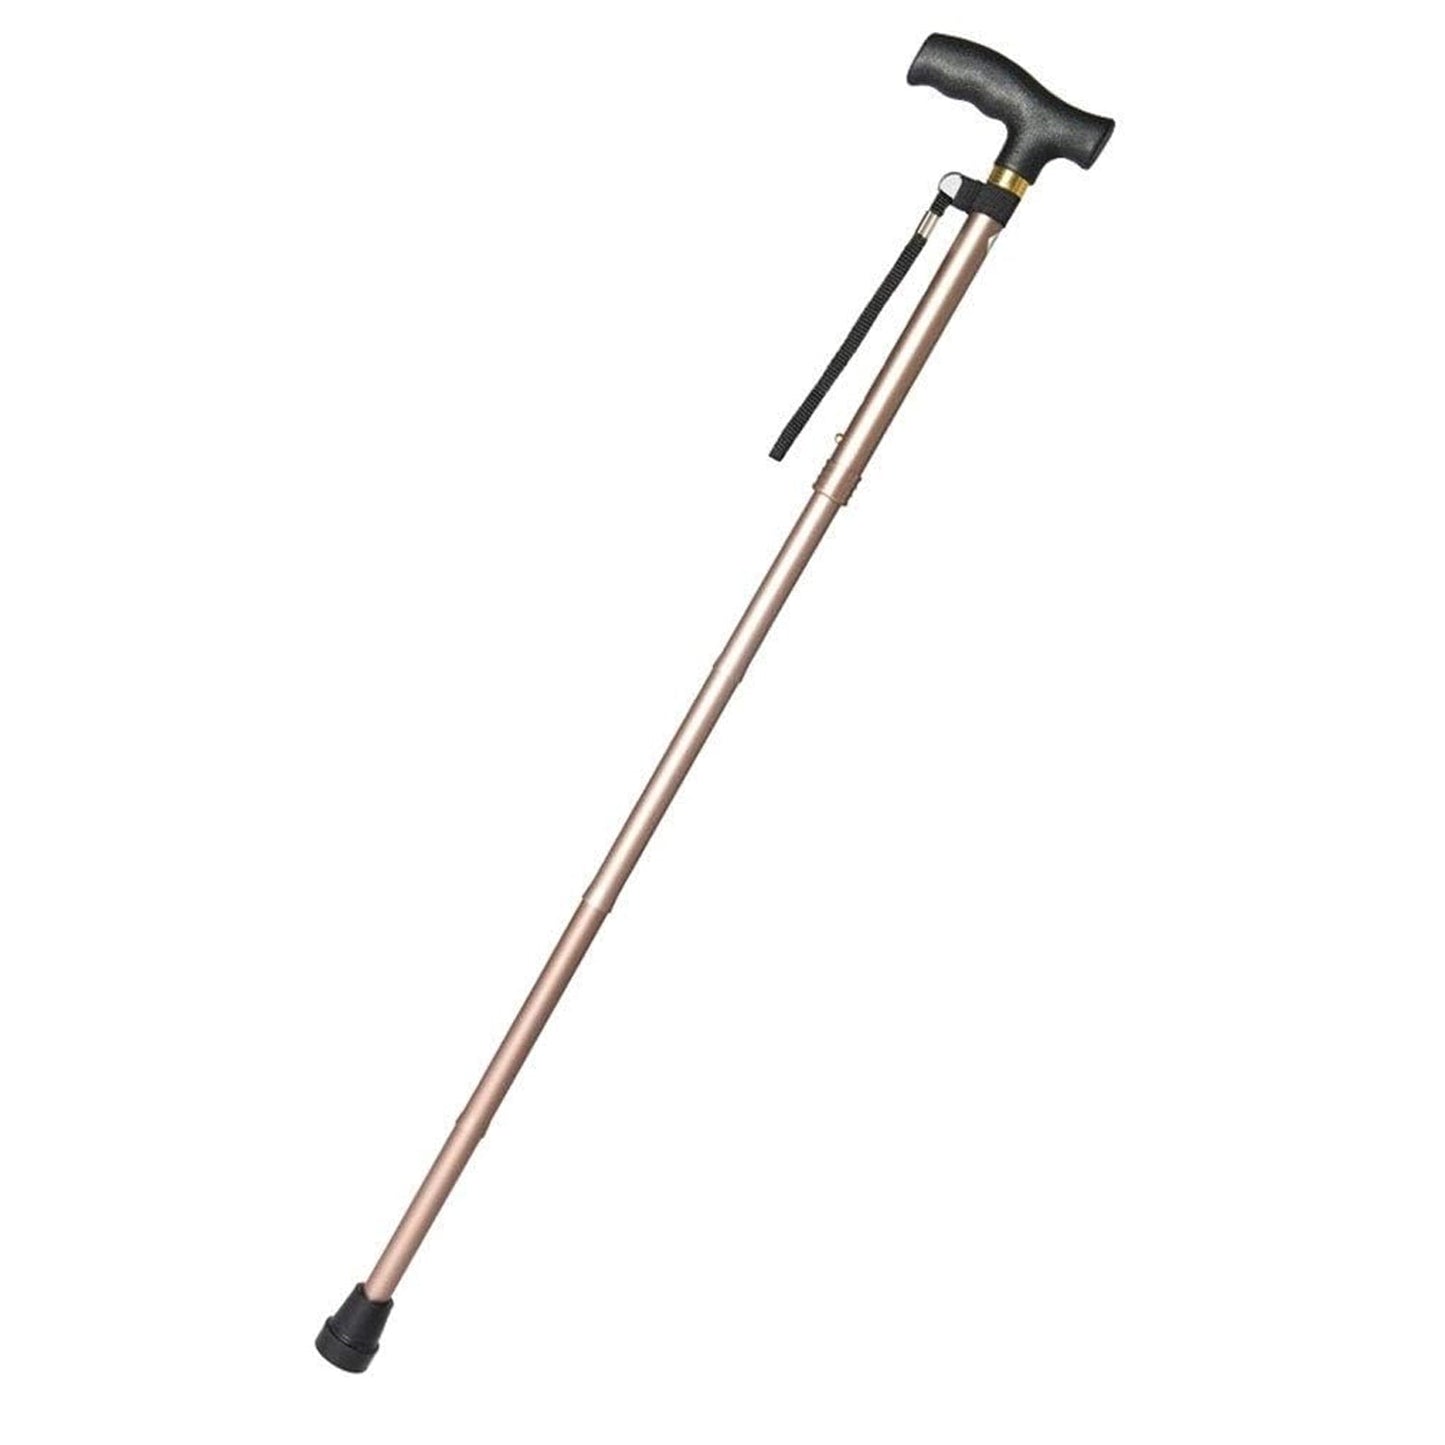 6579 Foldable Walking Cane for Men, Women - Fold-up, Collapsible, Lightweight, Adjustable, Portable Hand Walking Stick - Balancing Mobility Aid - Sleek, Comfortable T Handles